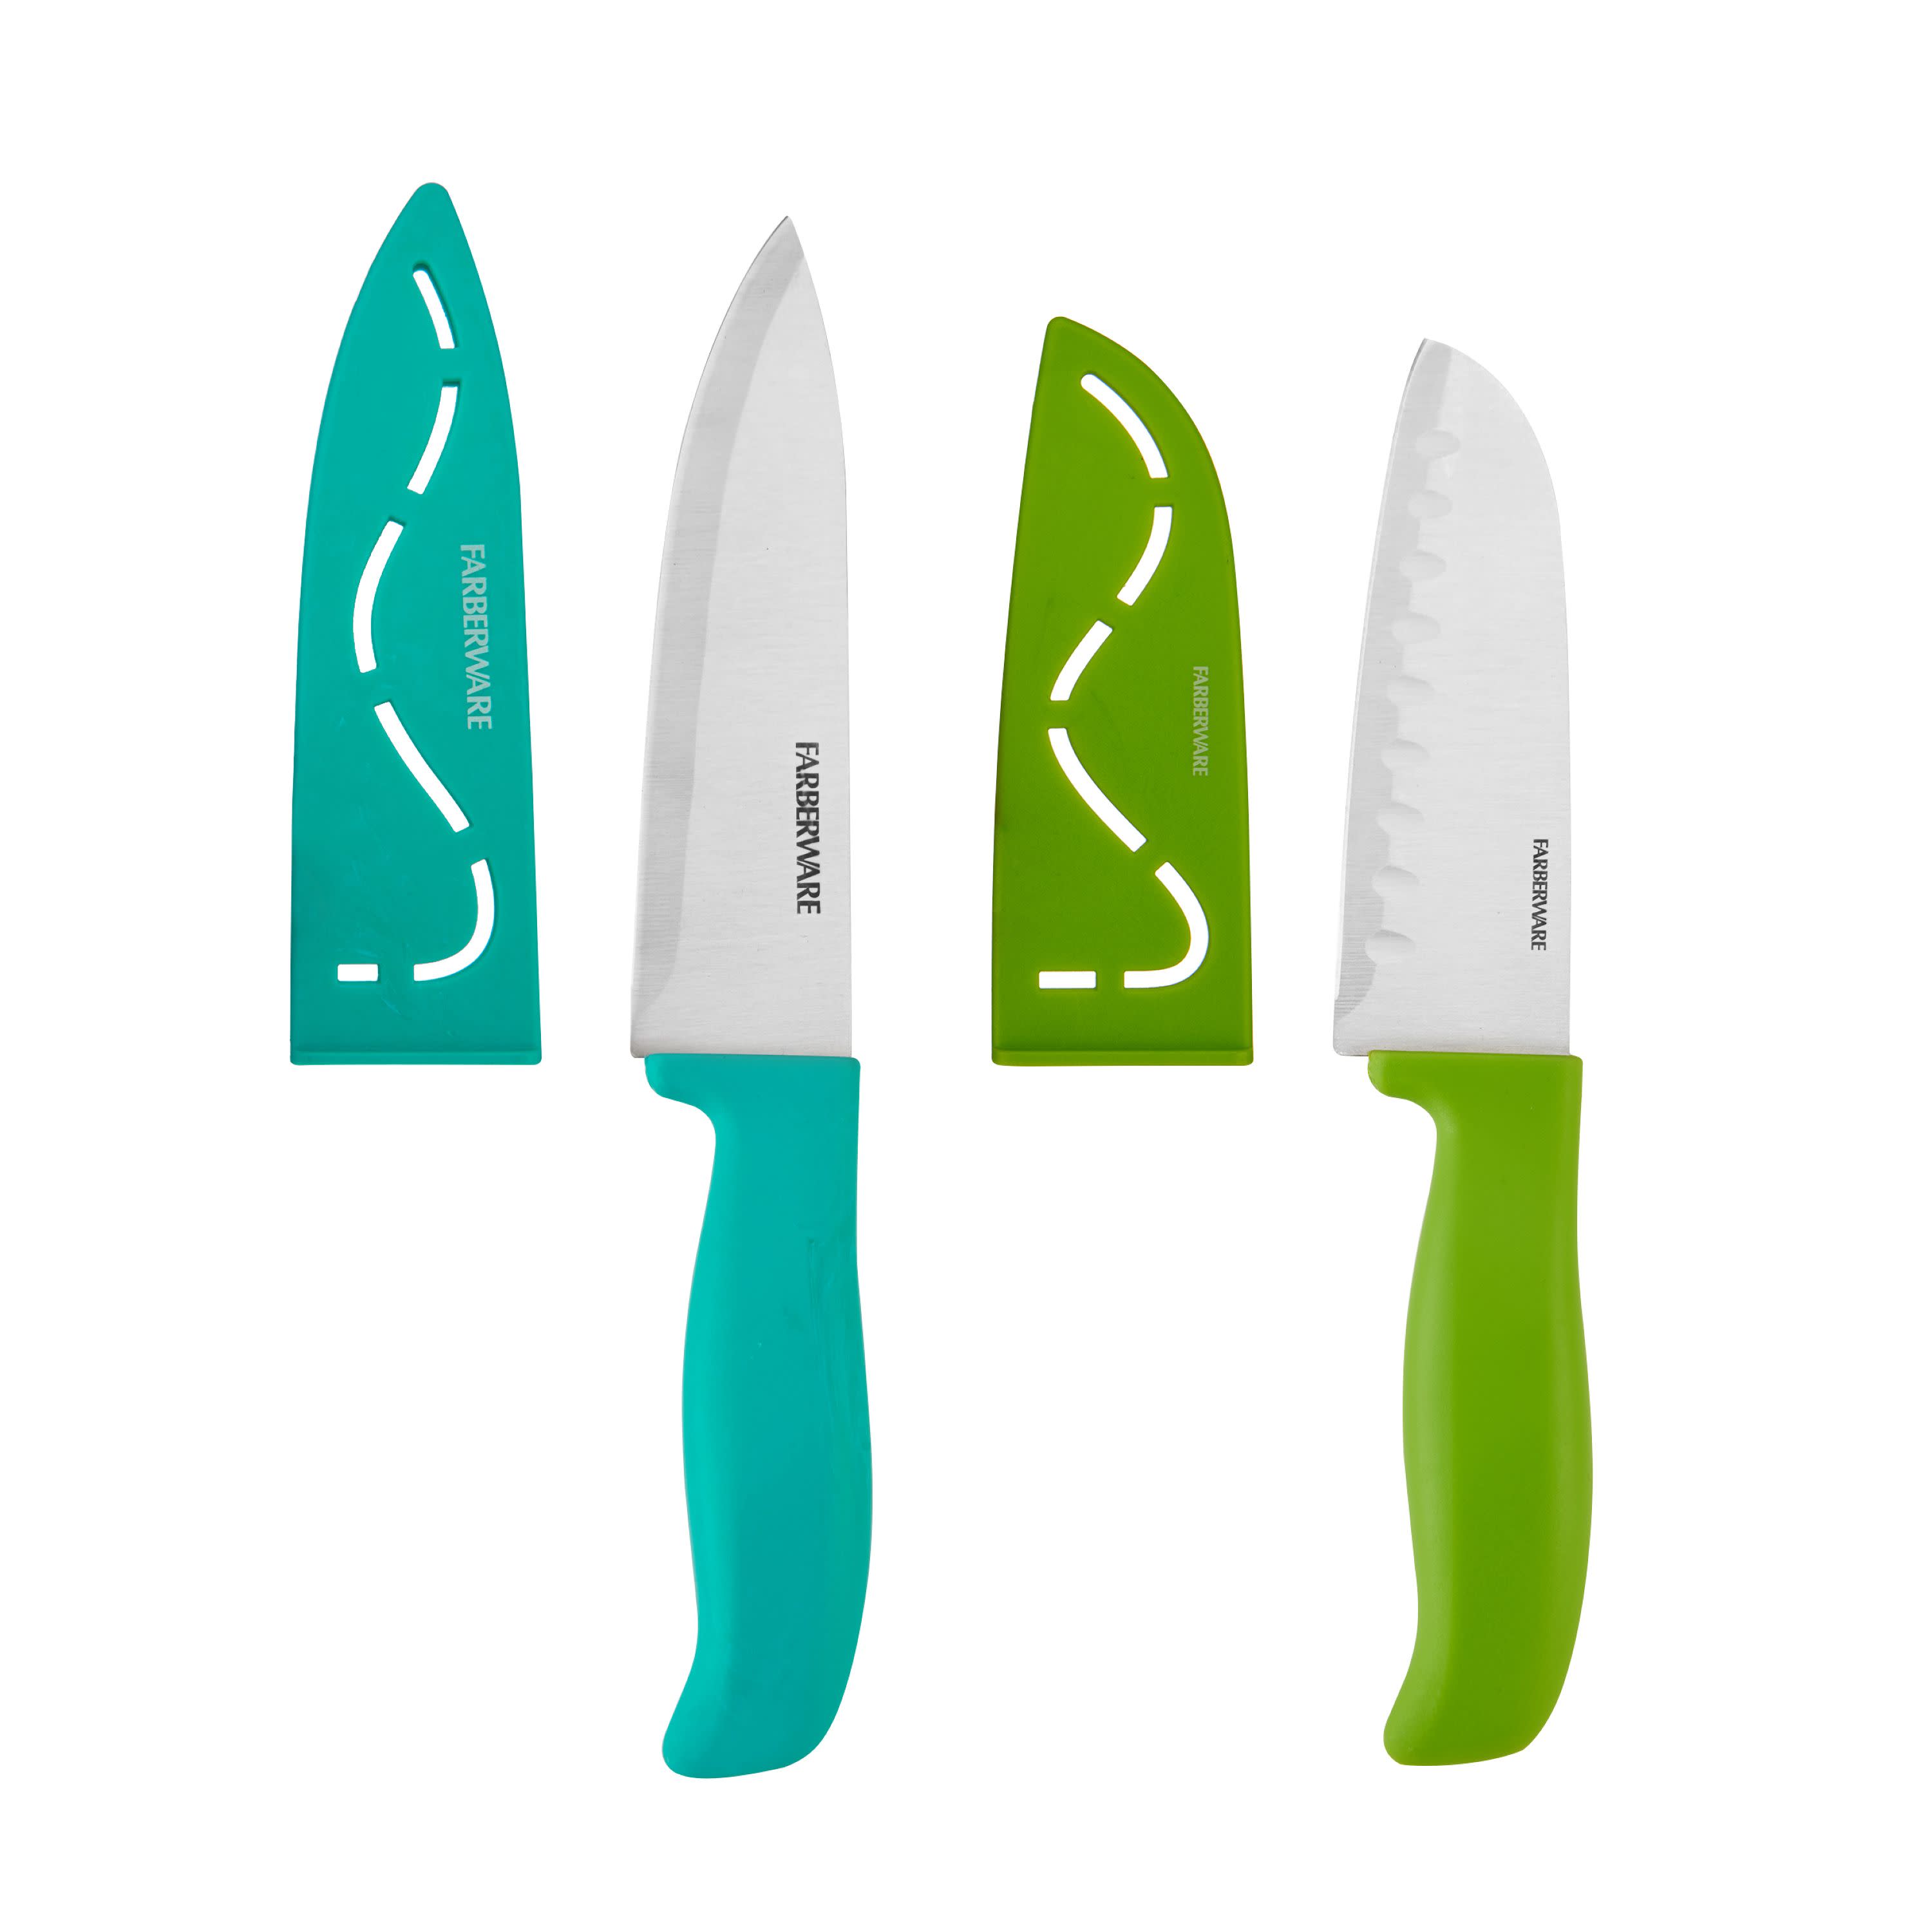 Farberware 4-piece Stamped Prep Knife Set Colored Plastic Handles - image 5 of 8